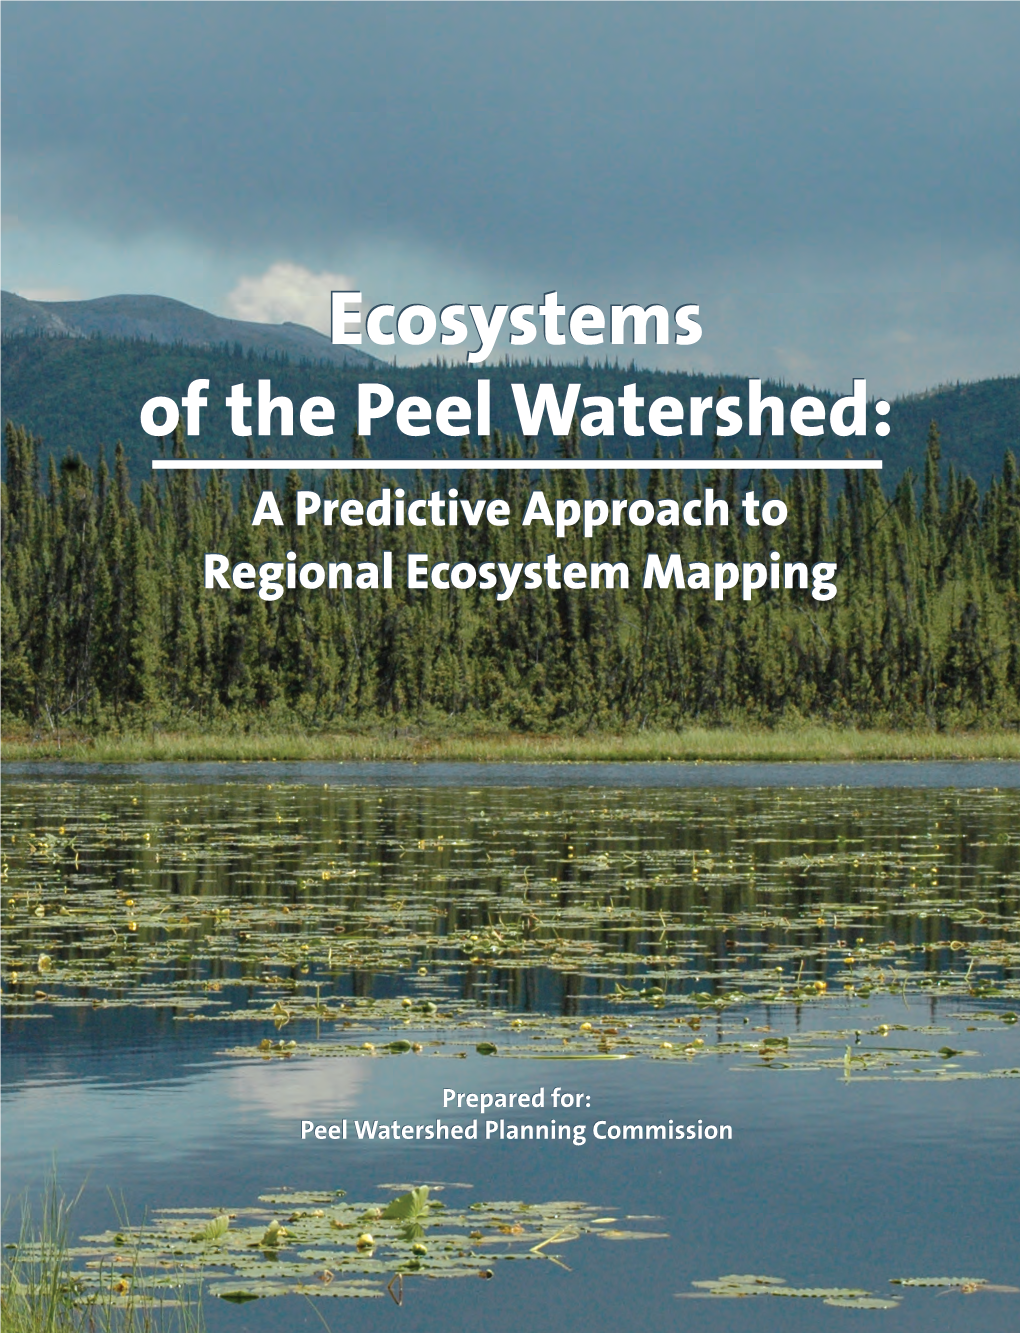 Ecosystems of the Peel Watershed: a Predictive Approach to Regional Ecosystem Mapping